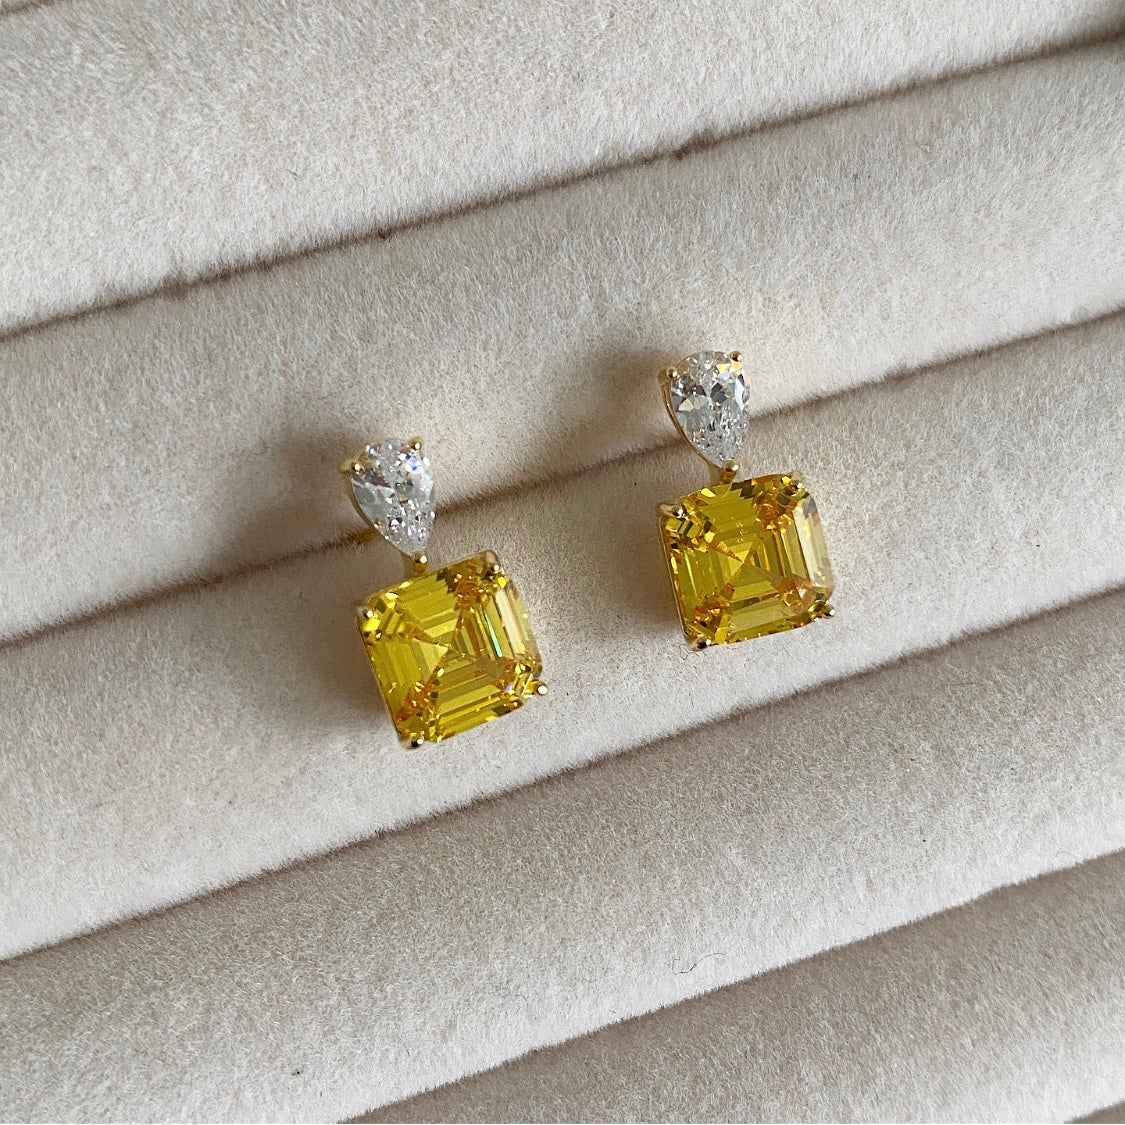 Experience the luxurious beauty of our Saali Crystal Earrings. Adorned with sparkling yellow cubic zirconia, these gold plated sterling silver earrings will elevate any outfit. Treat yourself or your loved ones to our exquisite and timeless pieces. Pair with Salli crystal necklace for a complete look.